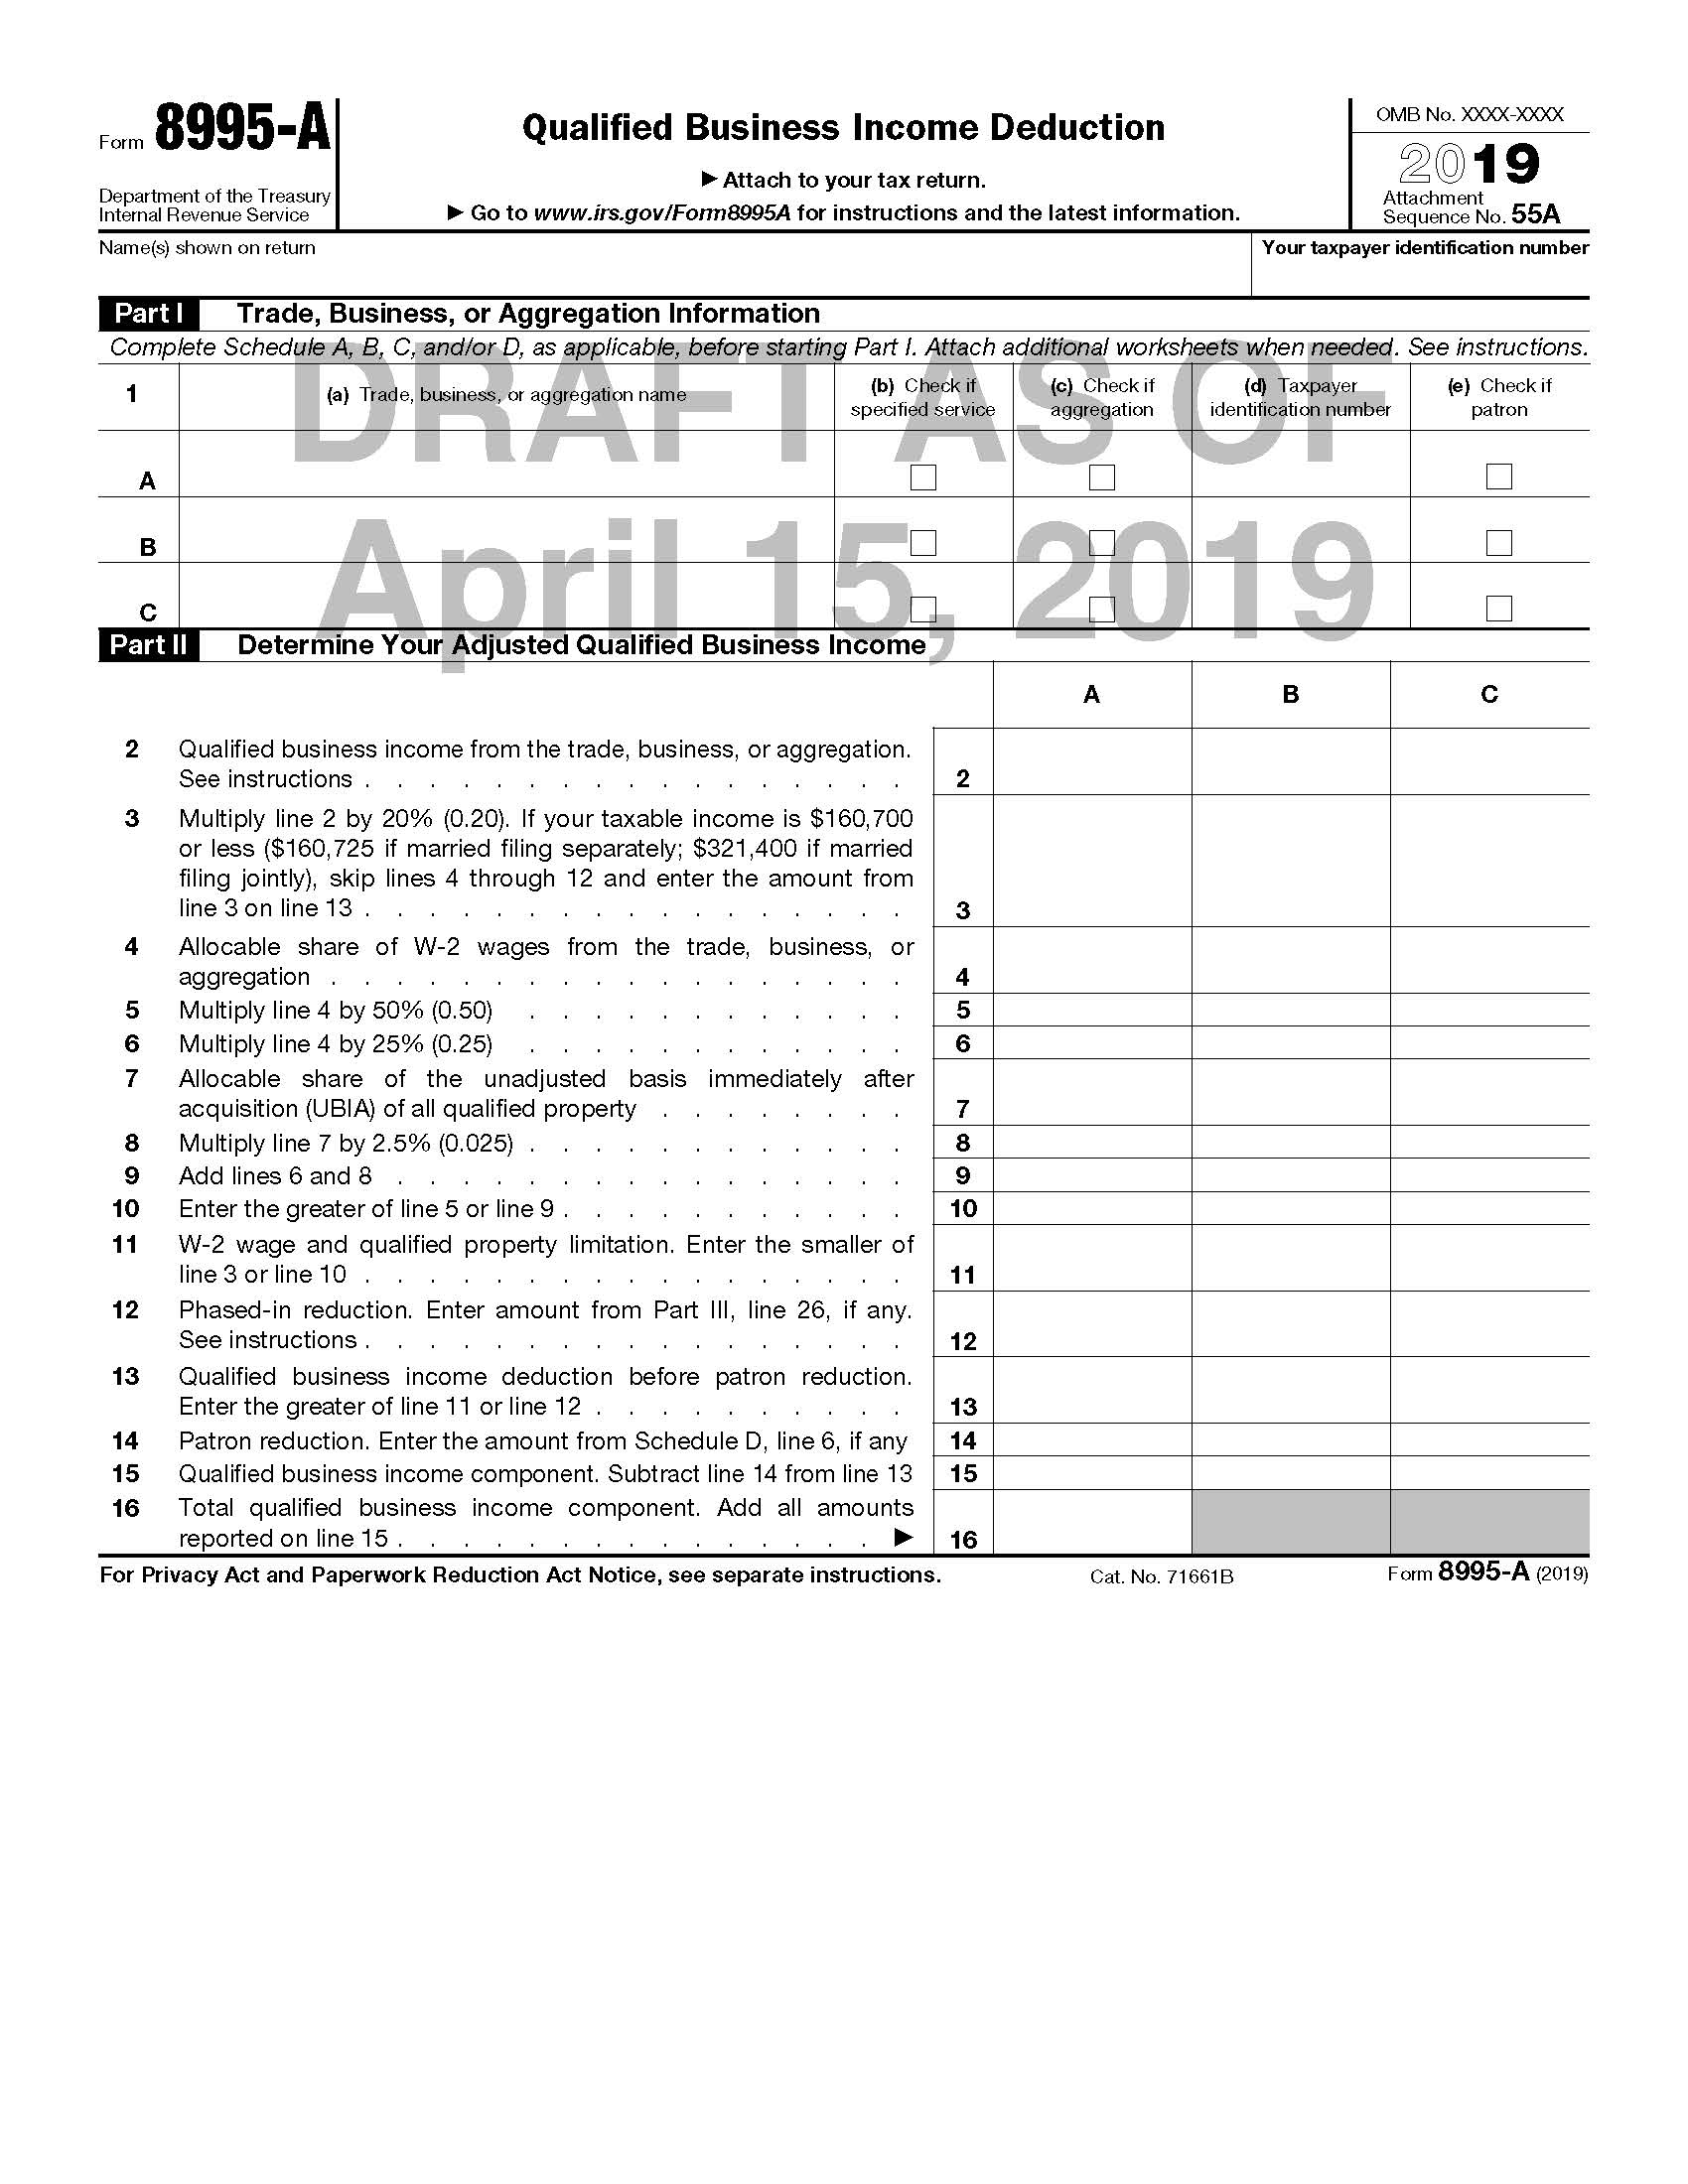 IRS Releases Drafts of Forms to Be Used to Calculate §199A Deduction on